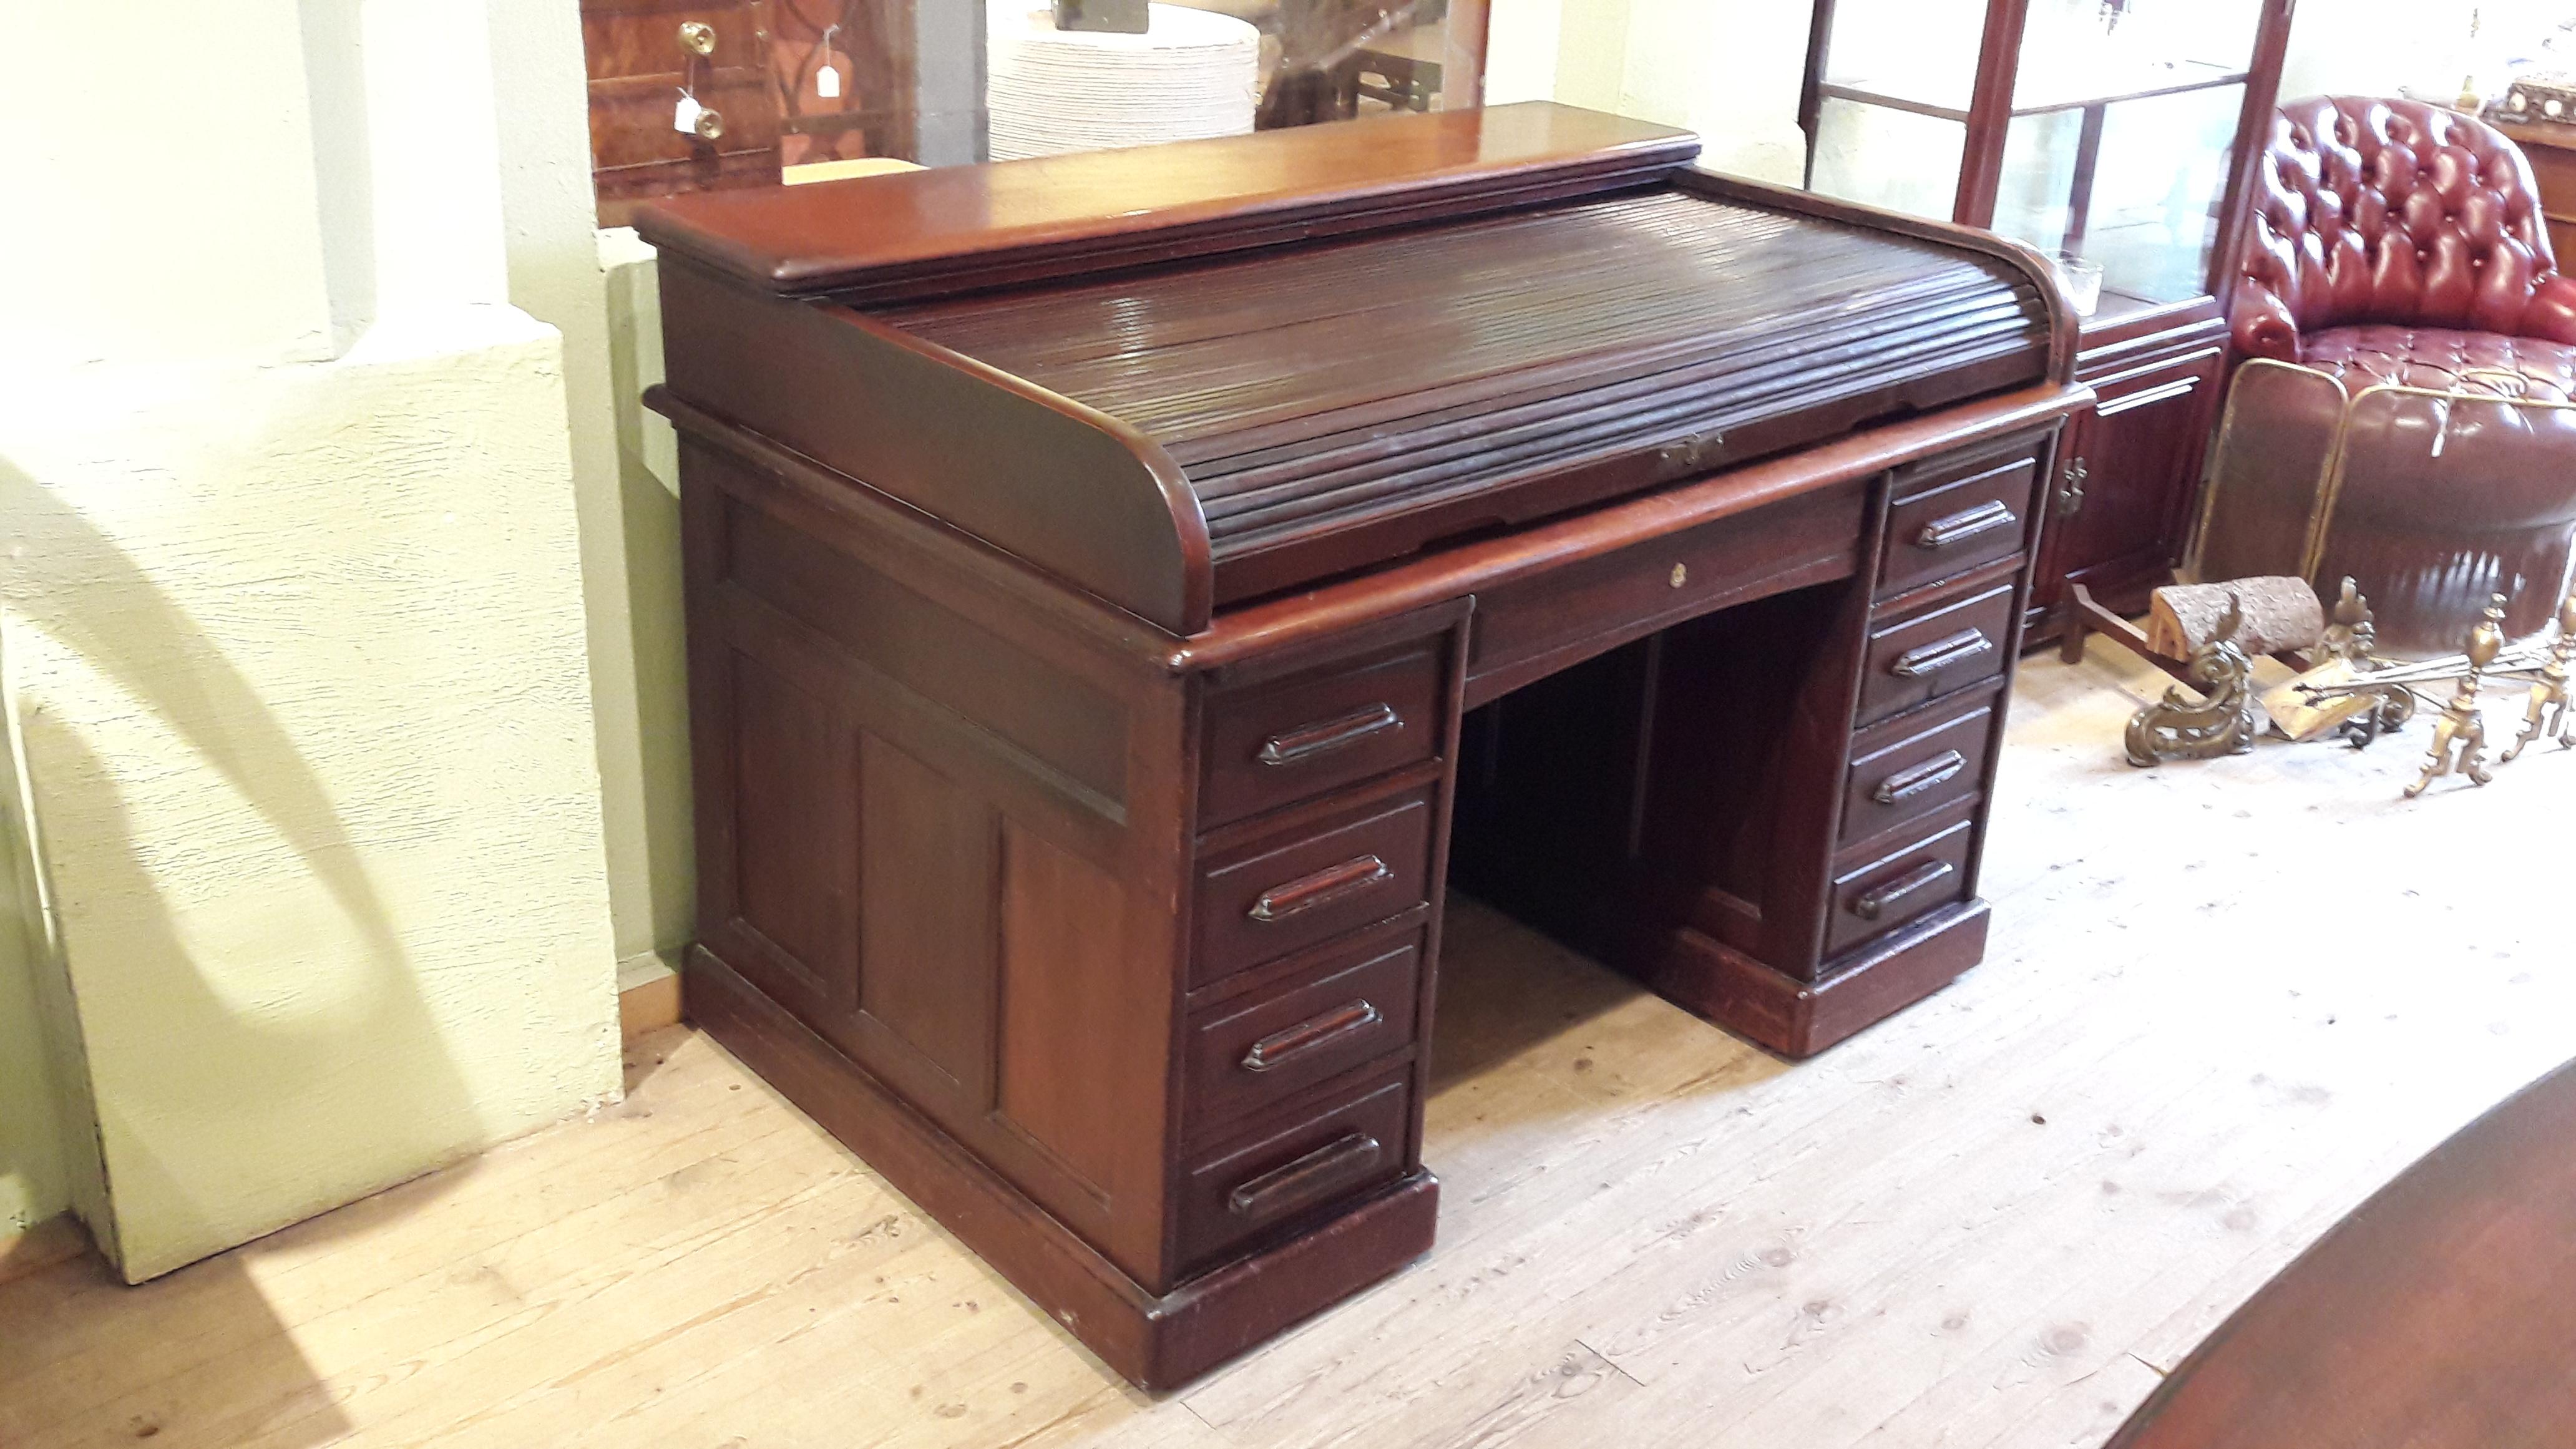 Great mahogany roll top desk. This piece was likely produced in Michigan State for Edgley. You can see on the pictures the 